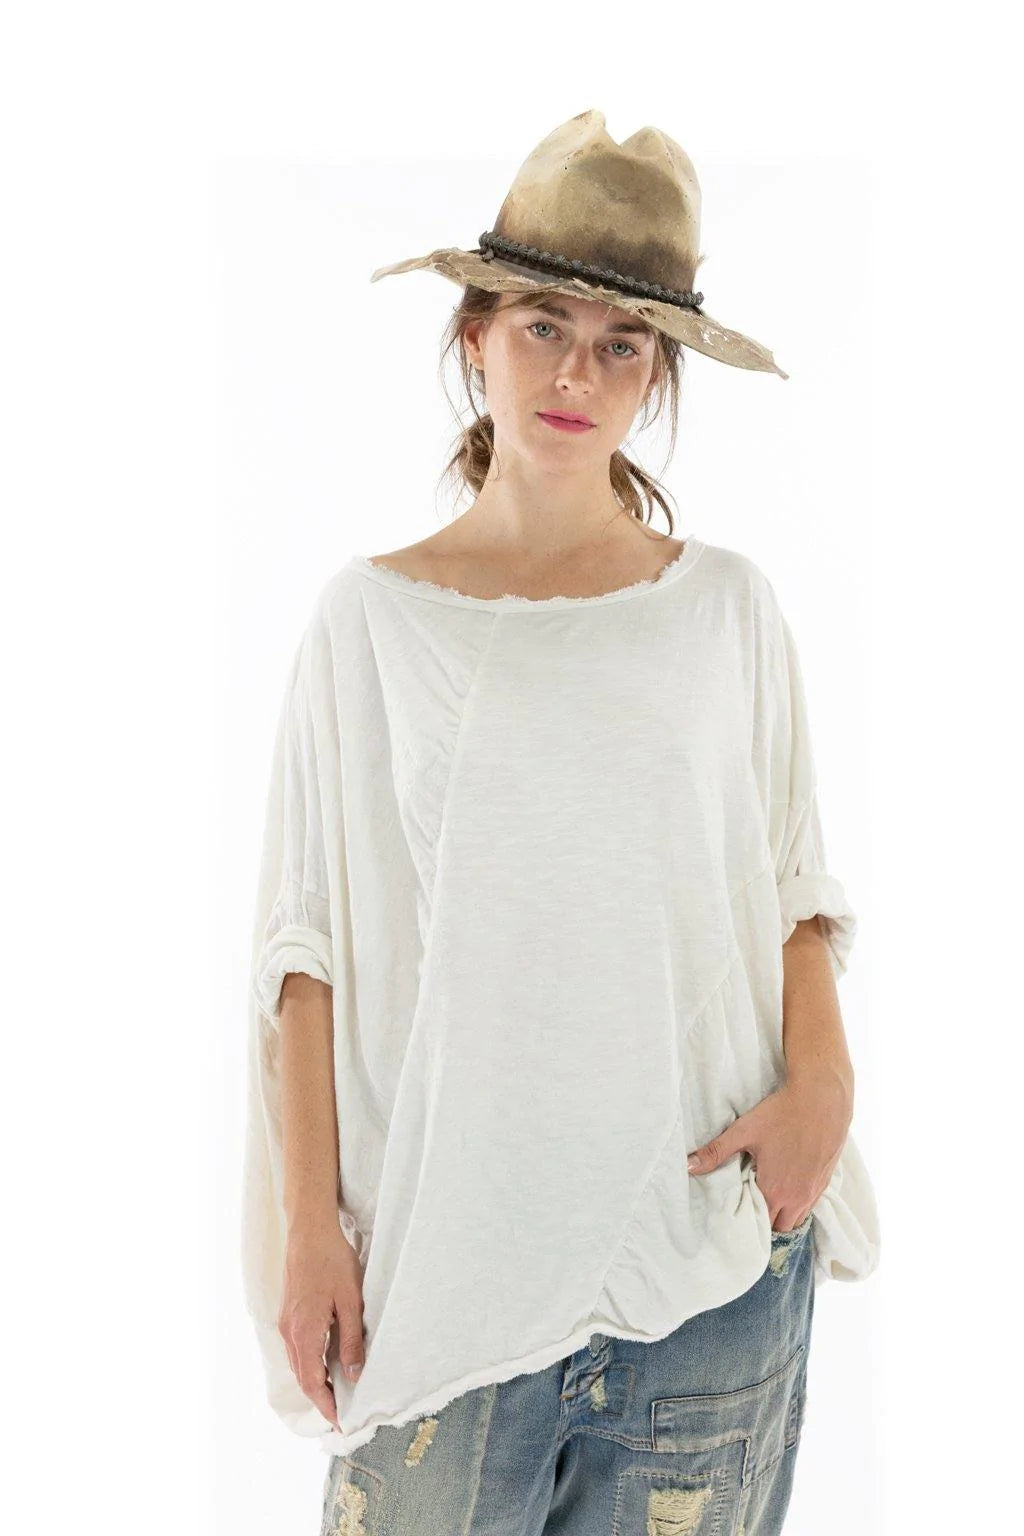 Magnolia Pearl | Top / Shirt Oversized Florrie T | TOP 982-MOON-OS - Feenreich